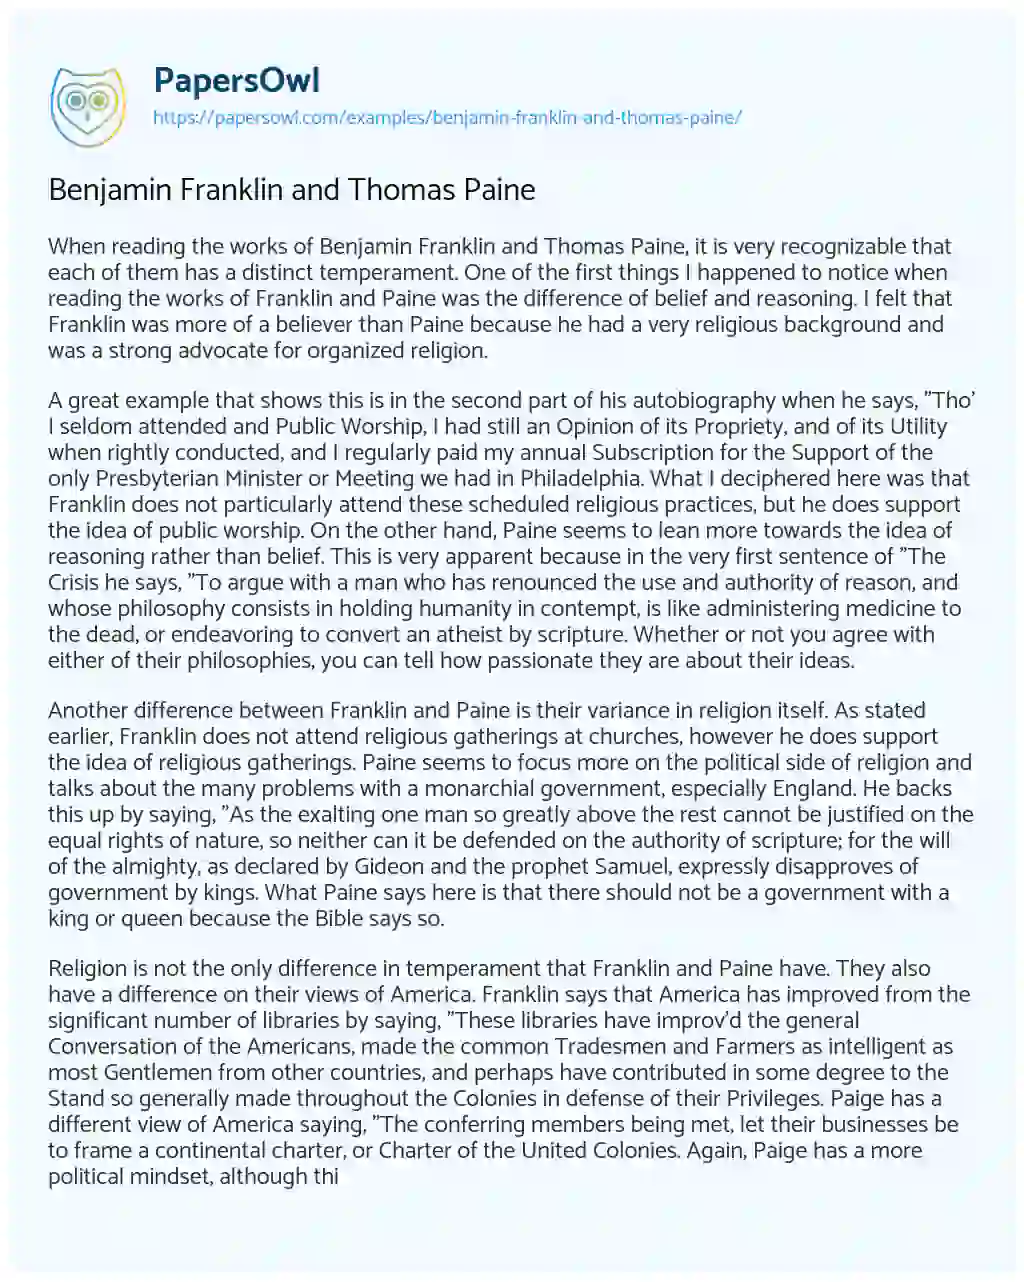 Essay on Benjamin Franklin and Thomas Paine